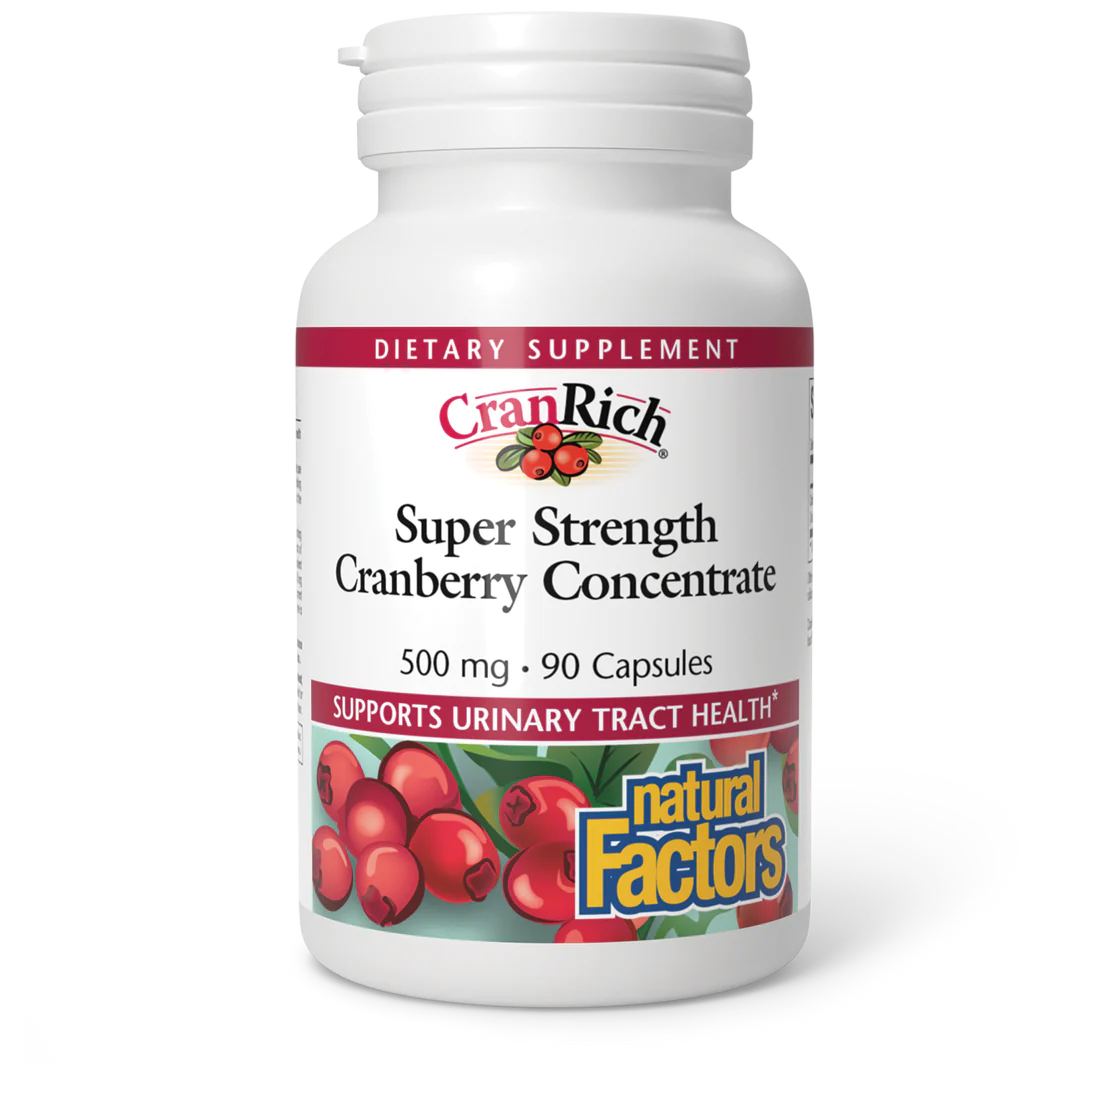 Cranberry Concentrate Super Strength by Natural Factors, 90 capsules 500 mg